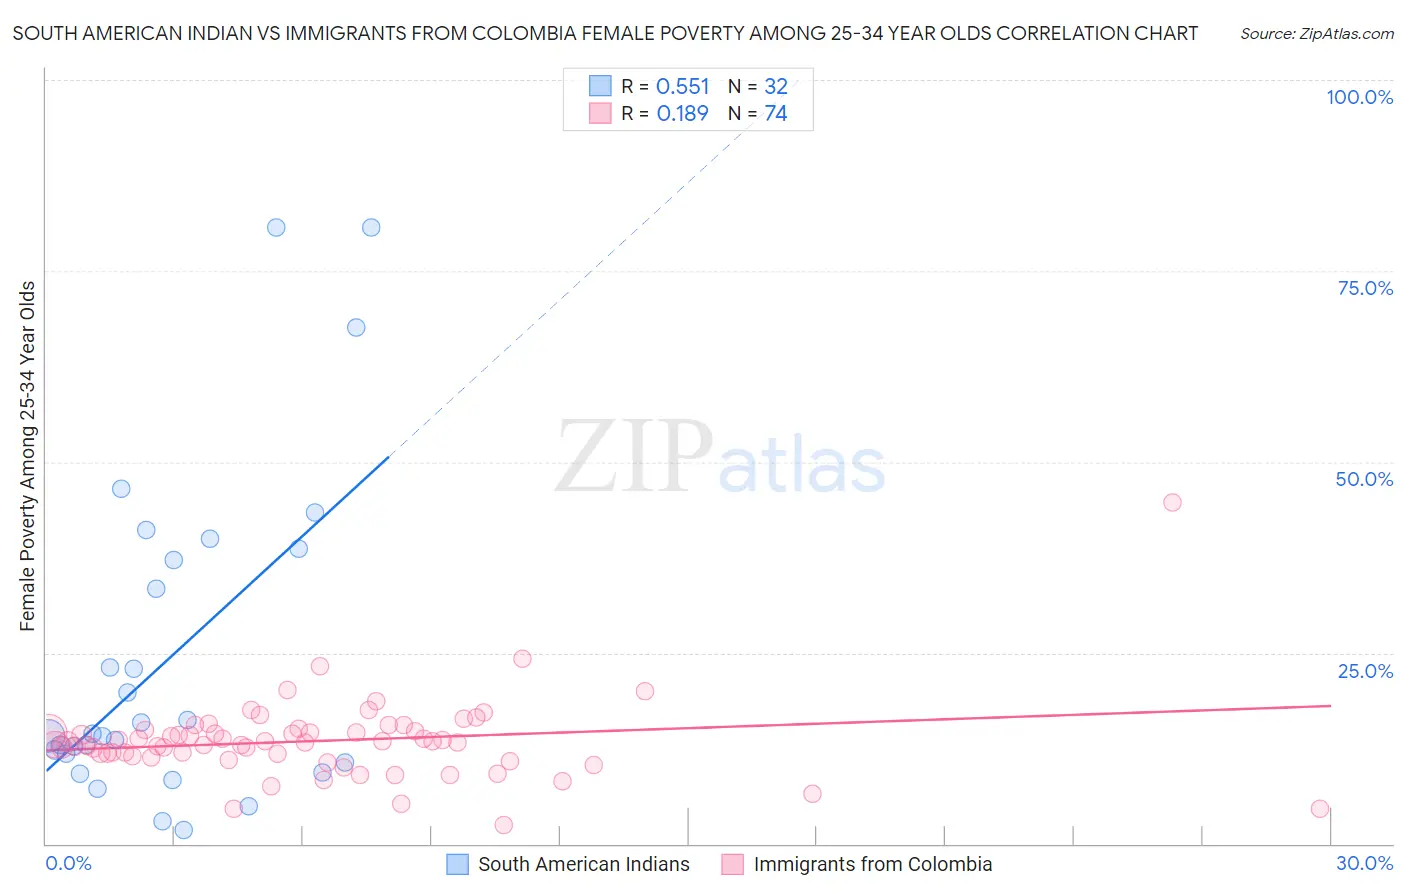 South American Indian vs Immigrants from Colombia Female Poverty Among 25-34 Year Olds